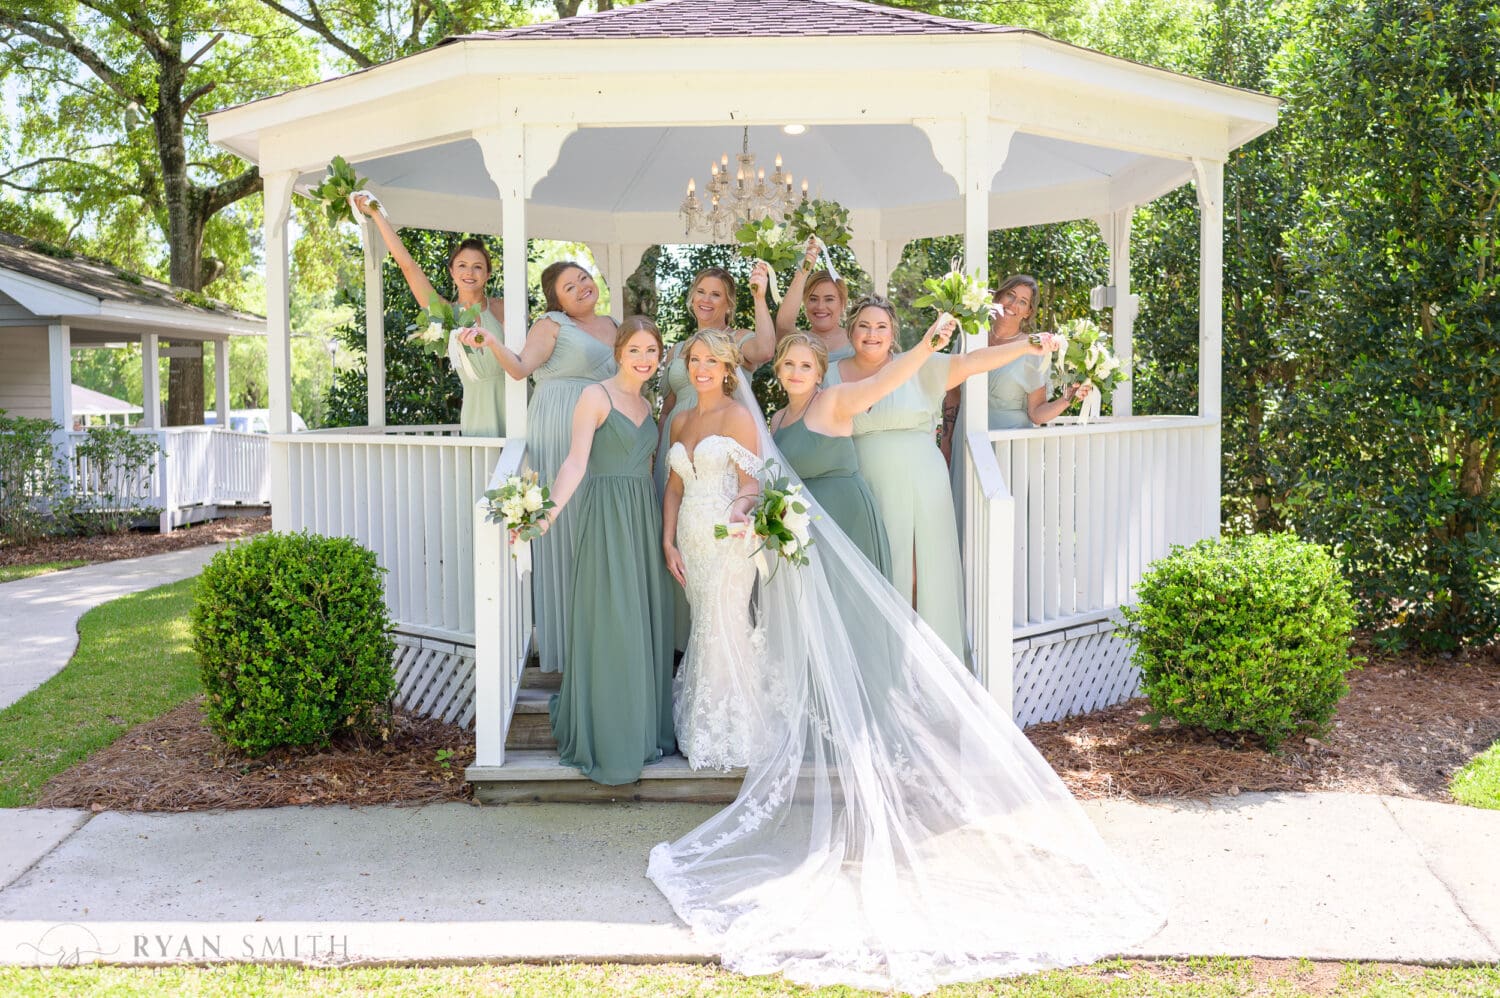 Bride with her bridesmaids in the gazebo - The Village House at Litchfield